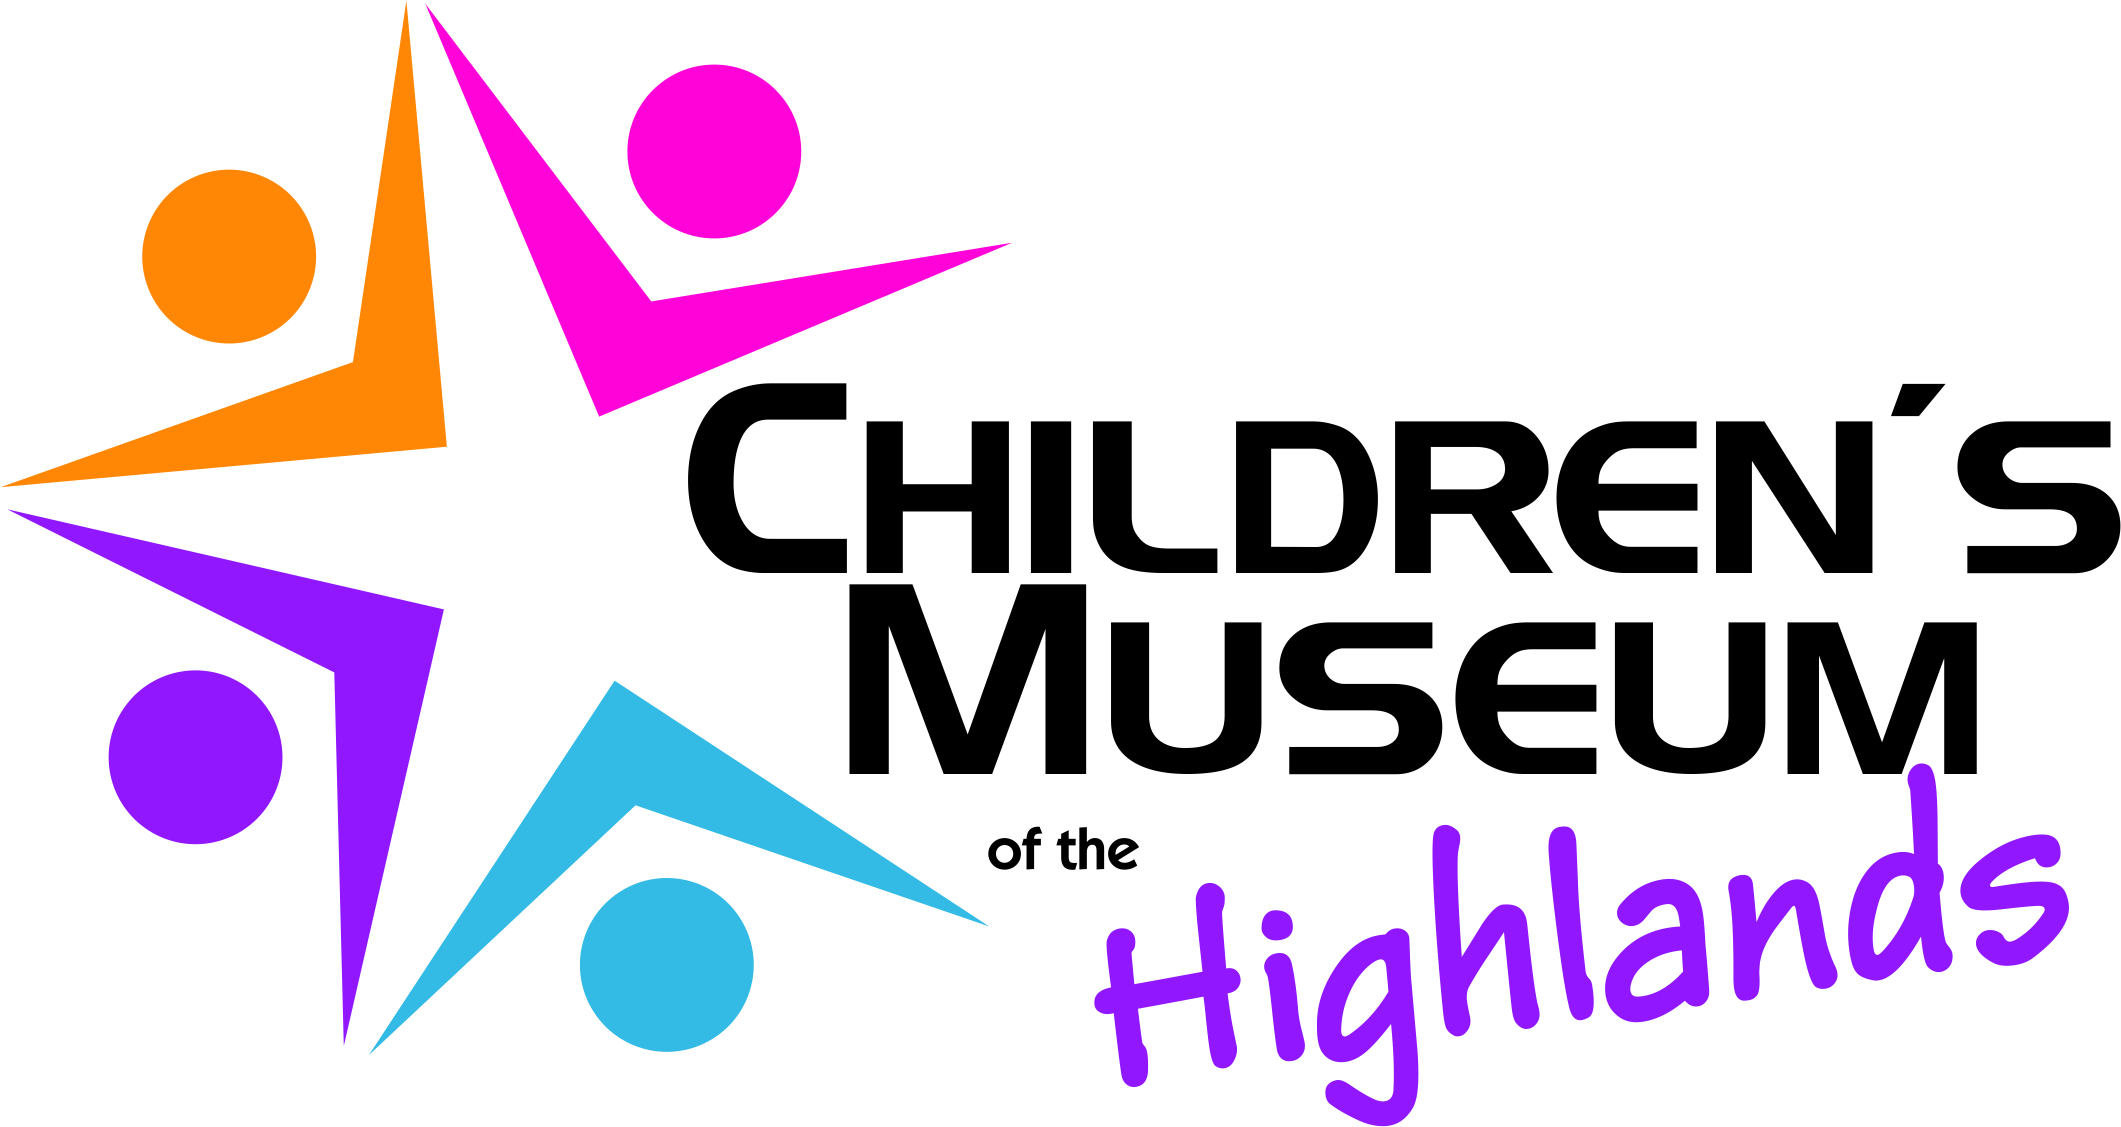 Childrens Museum of the Highlands logo